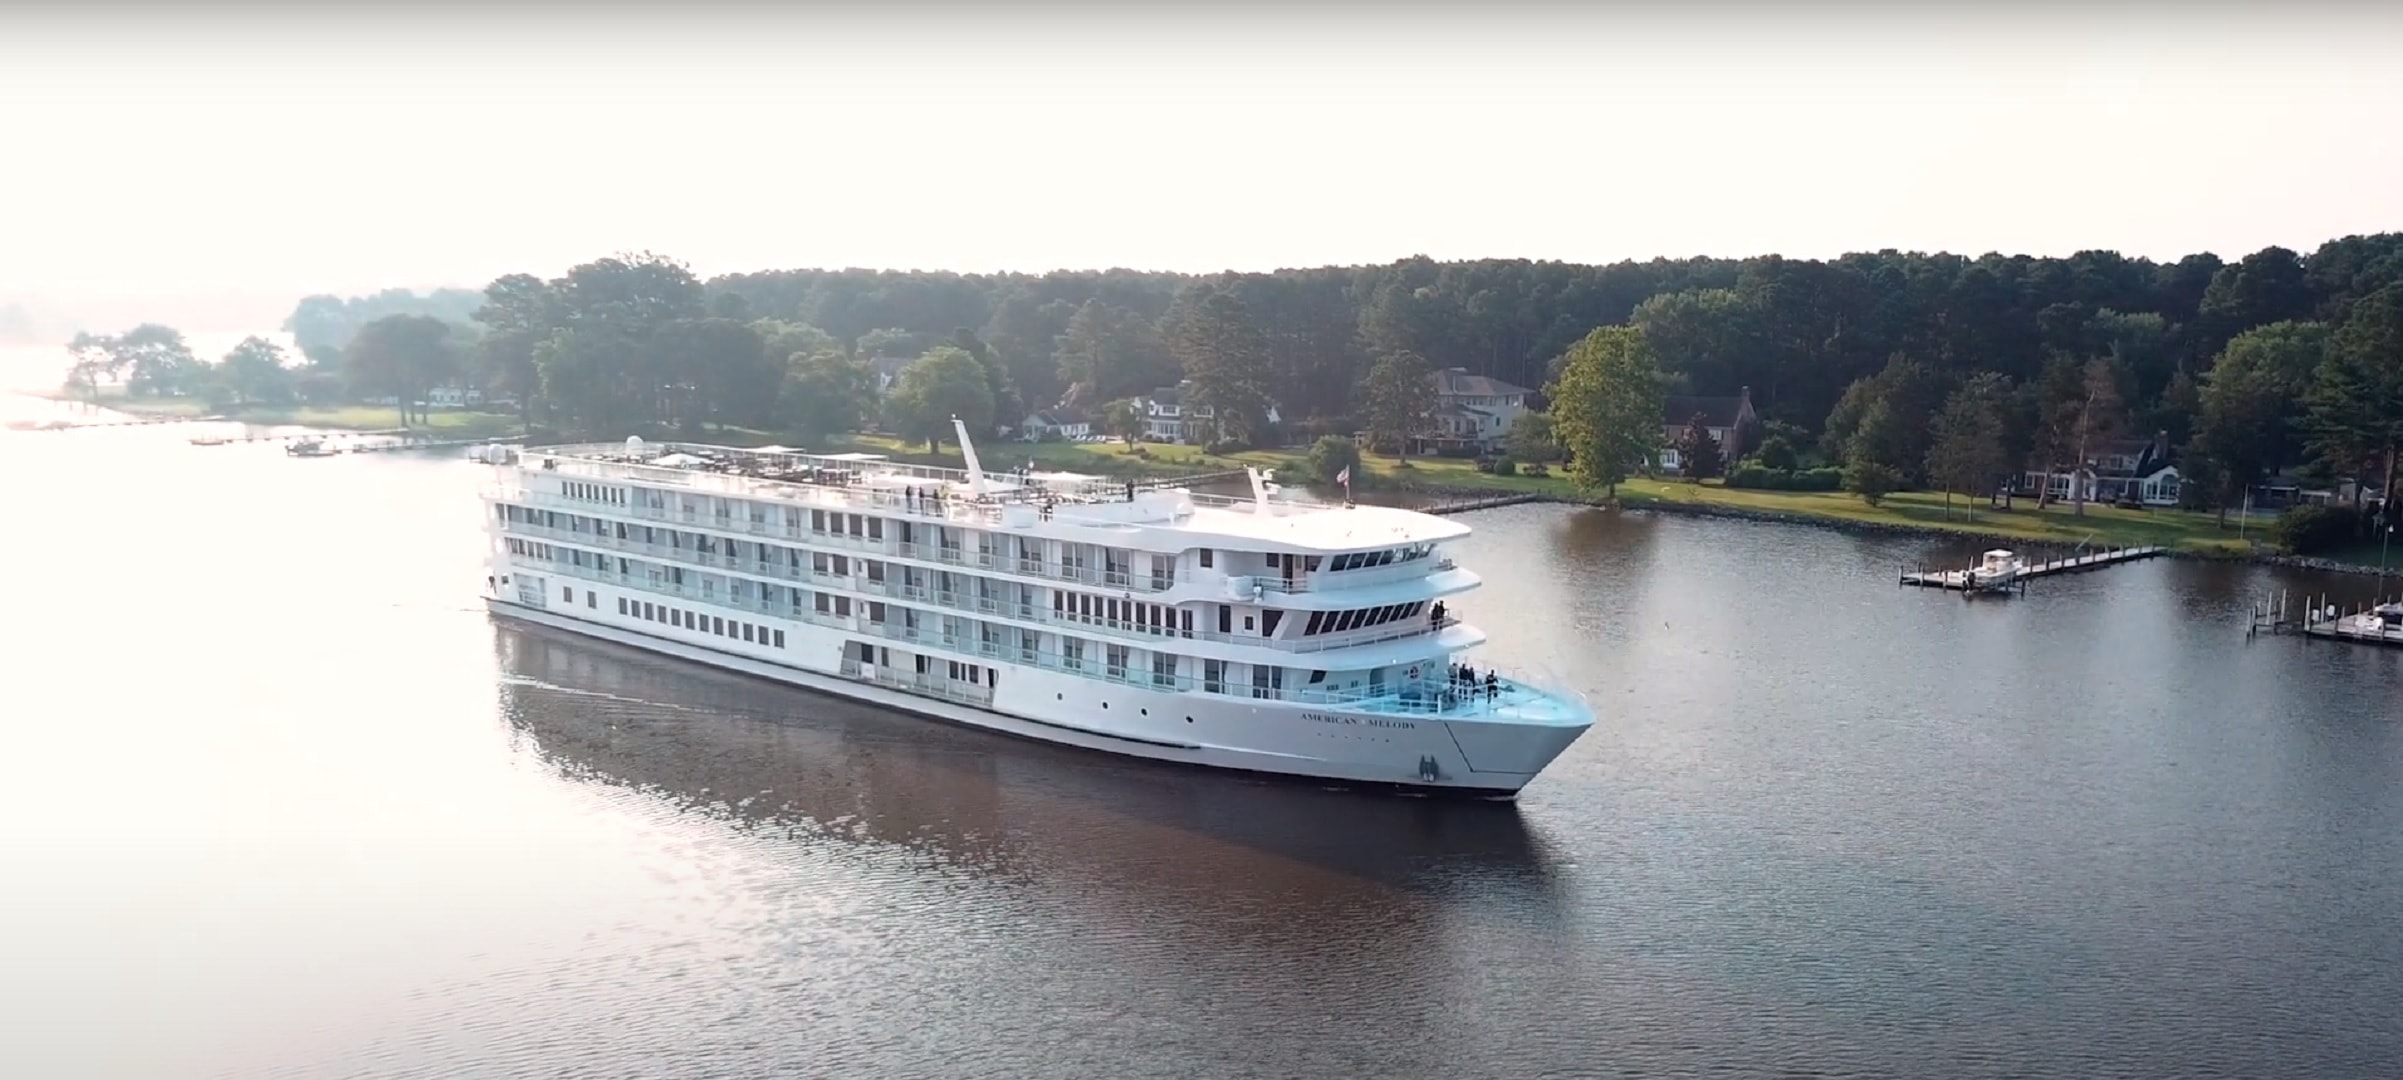 who owns american river cruises